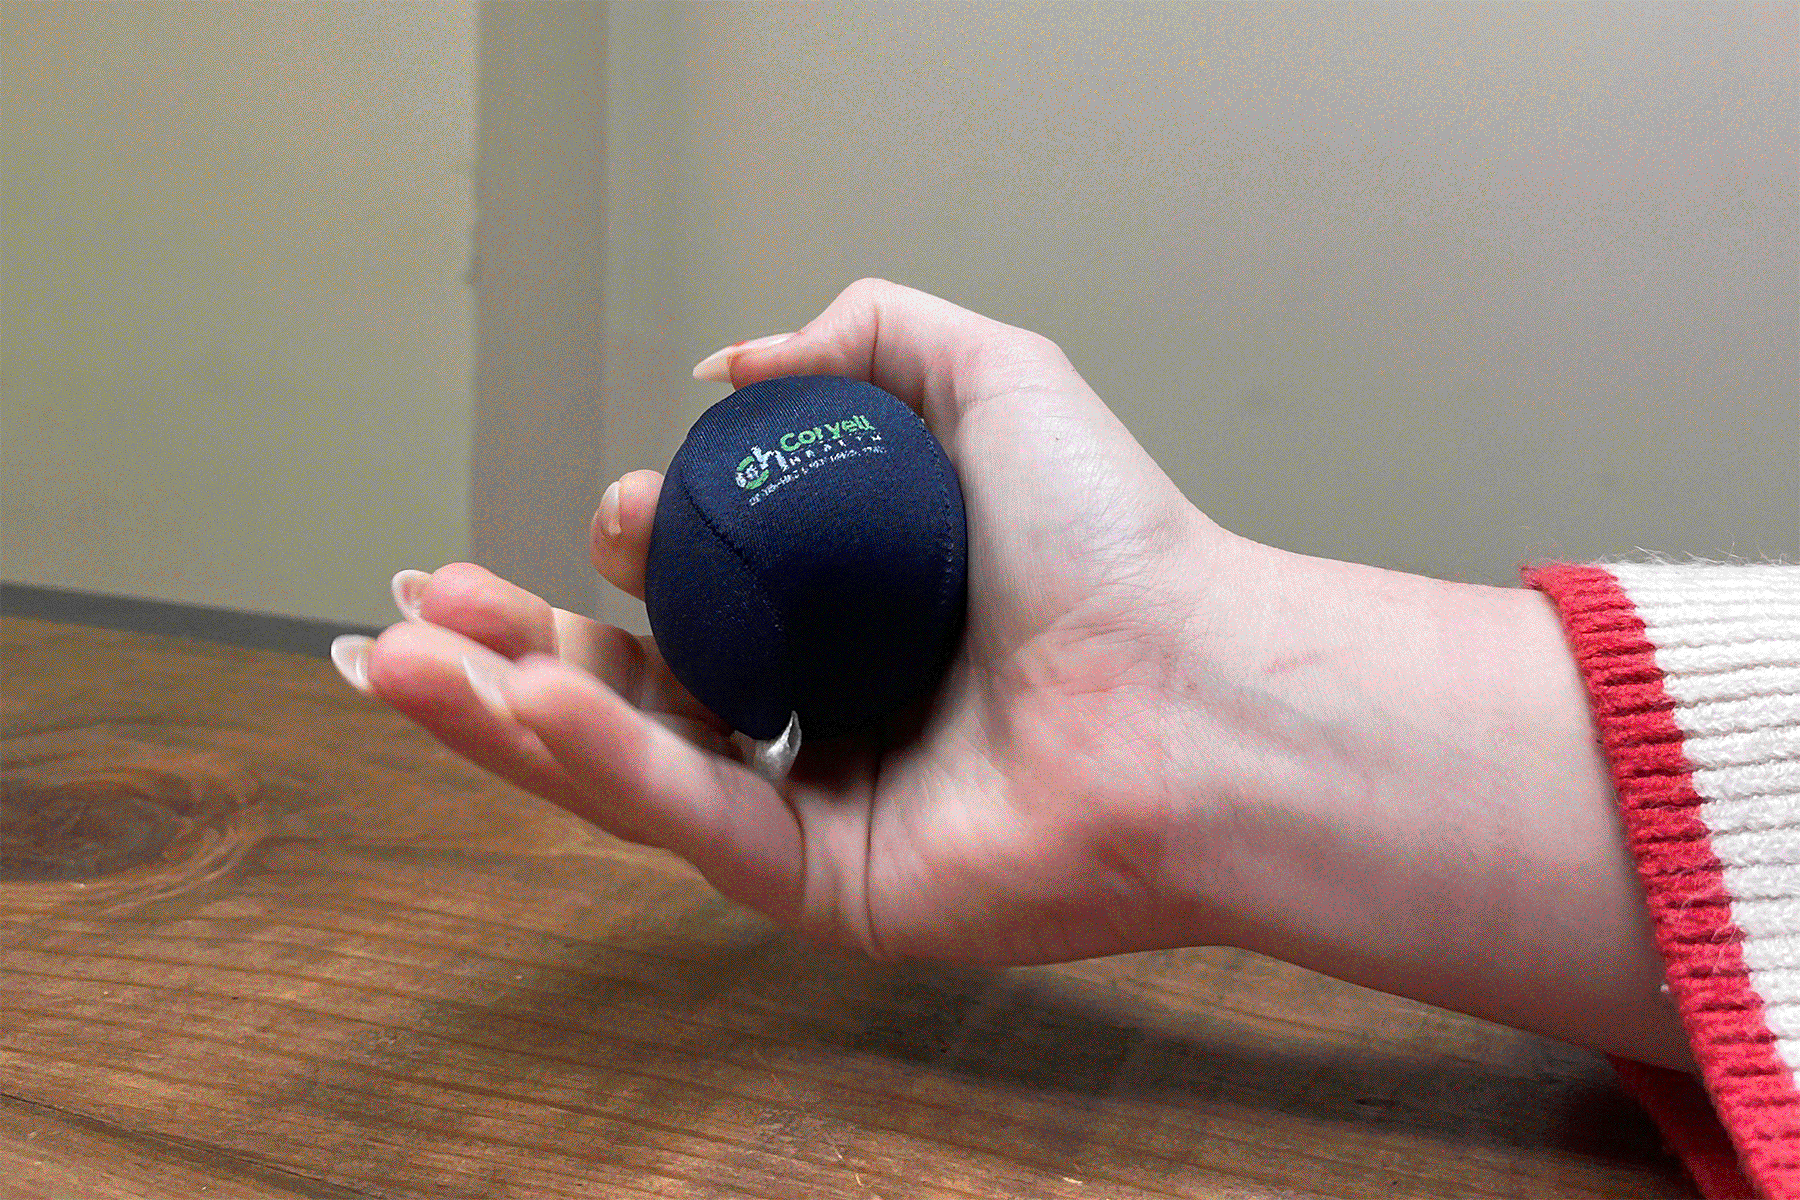 Ball squeezing gif